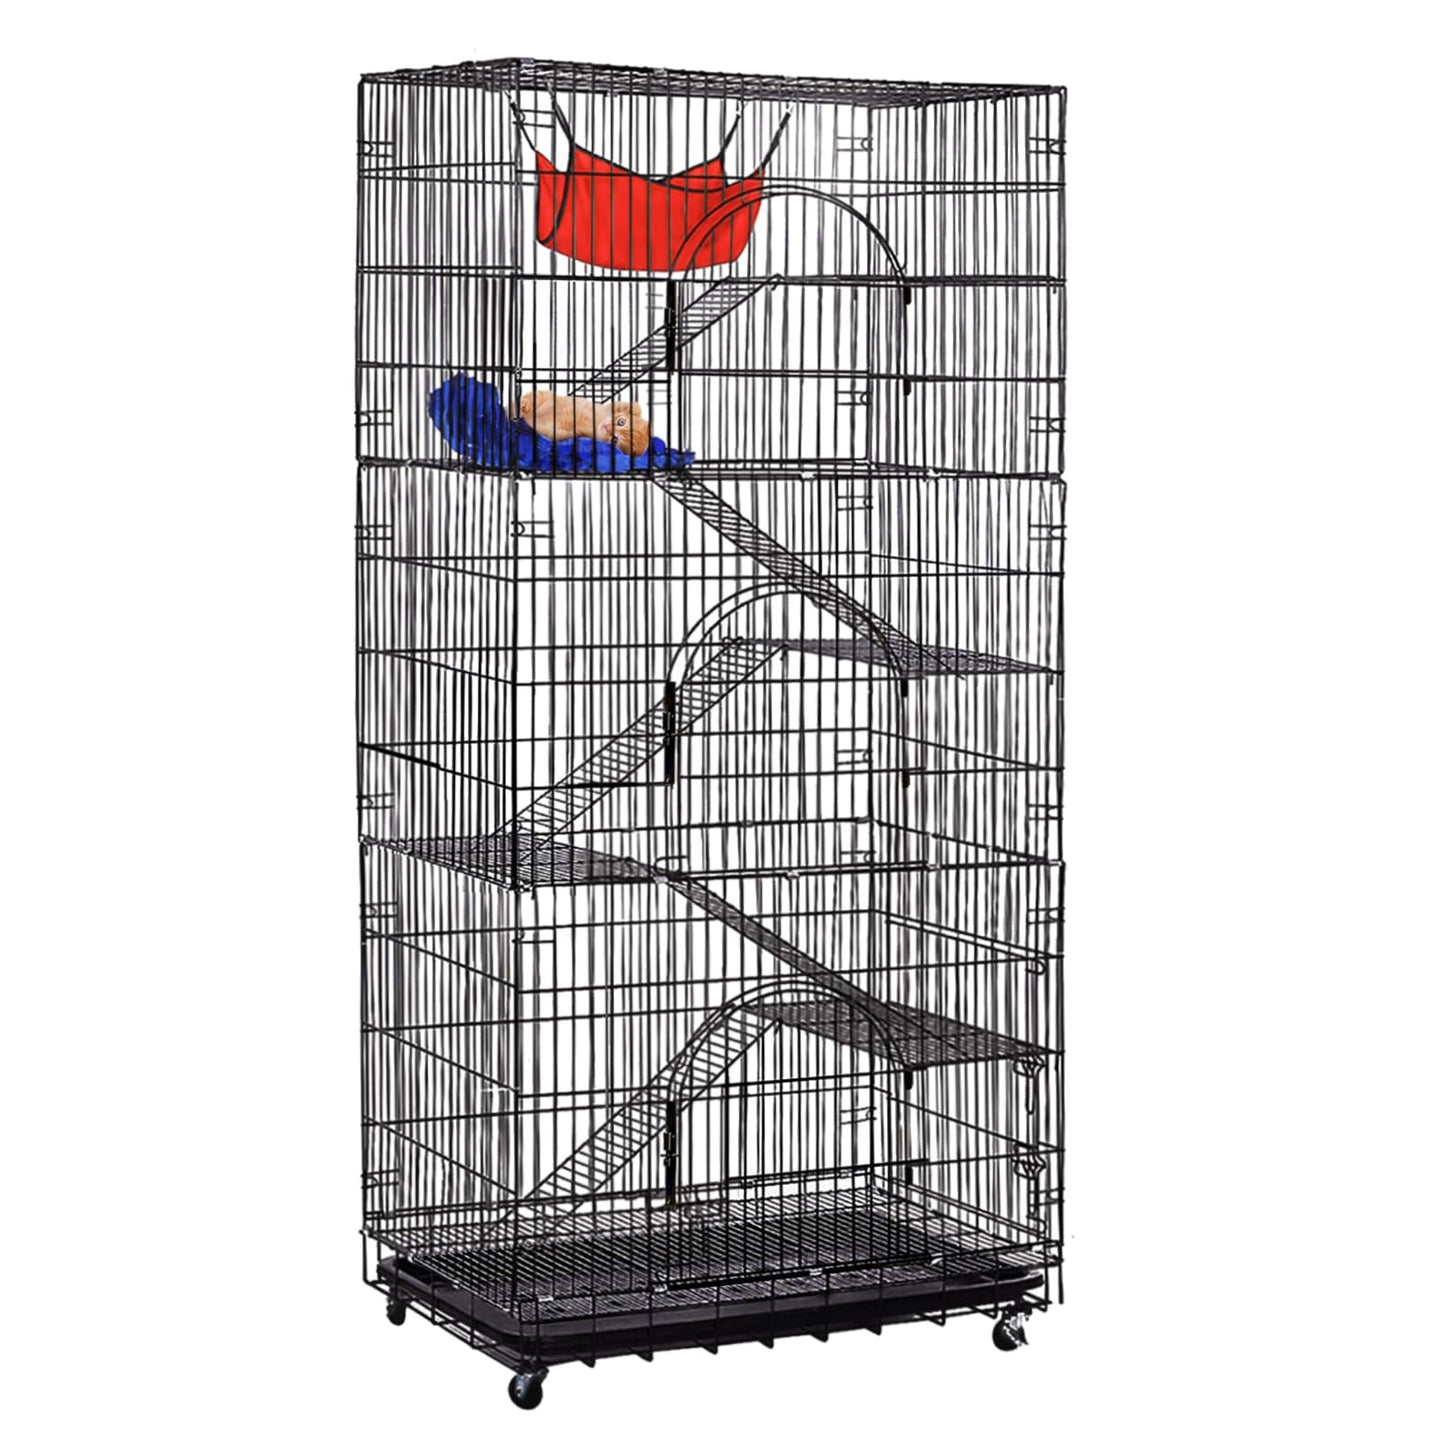 6-Tier Wire Cat Cage, 76inch Cat Playpen Enclosure Catio with Hammock and Rotating Wheels for Kittens, Ferrets & Small Animals Indoor Outdoor